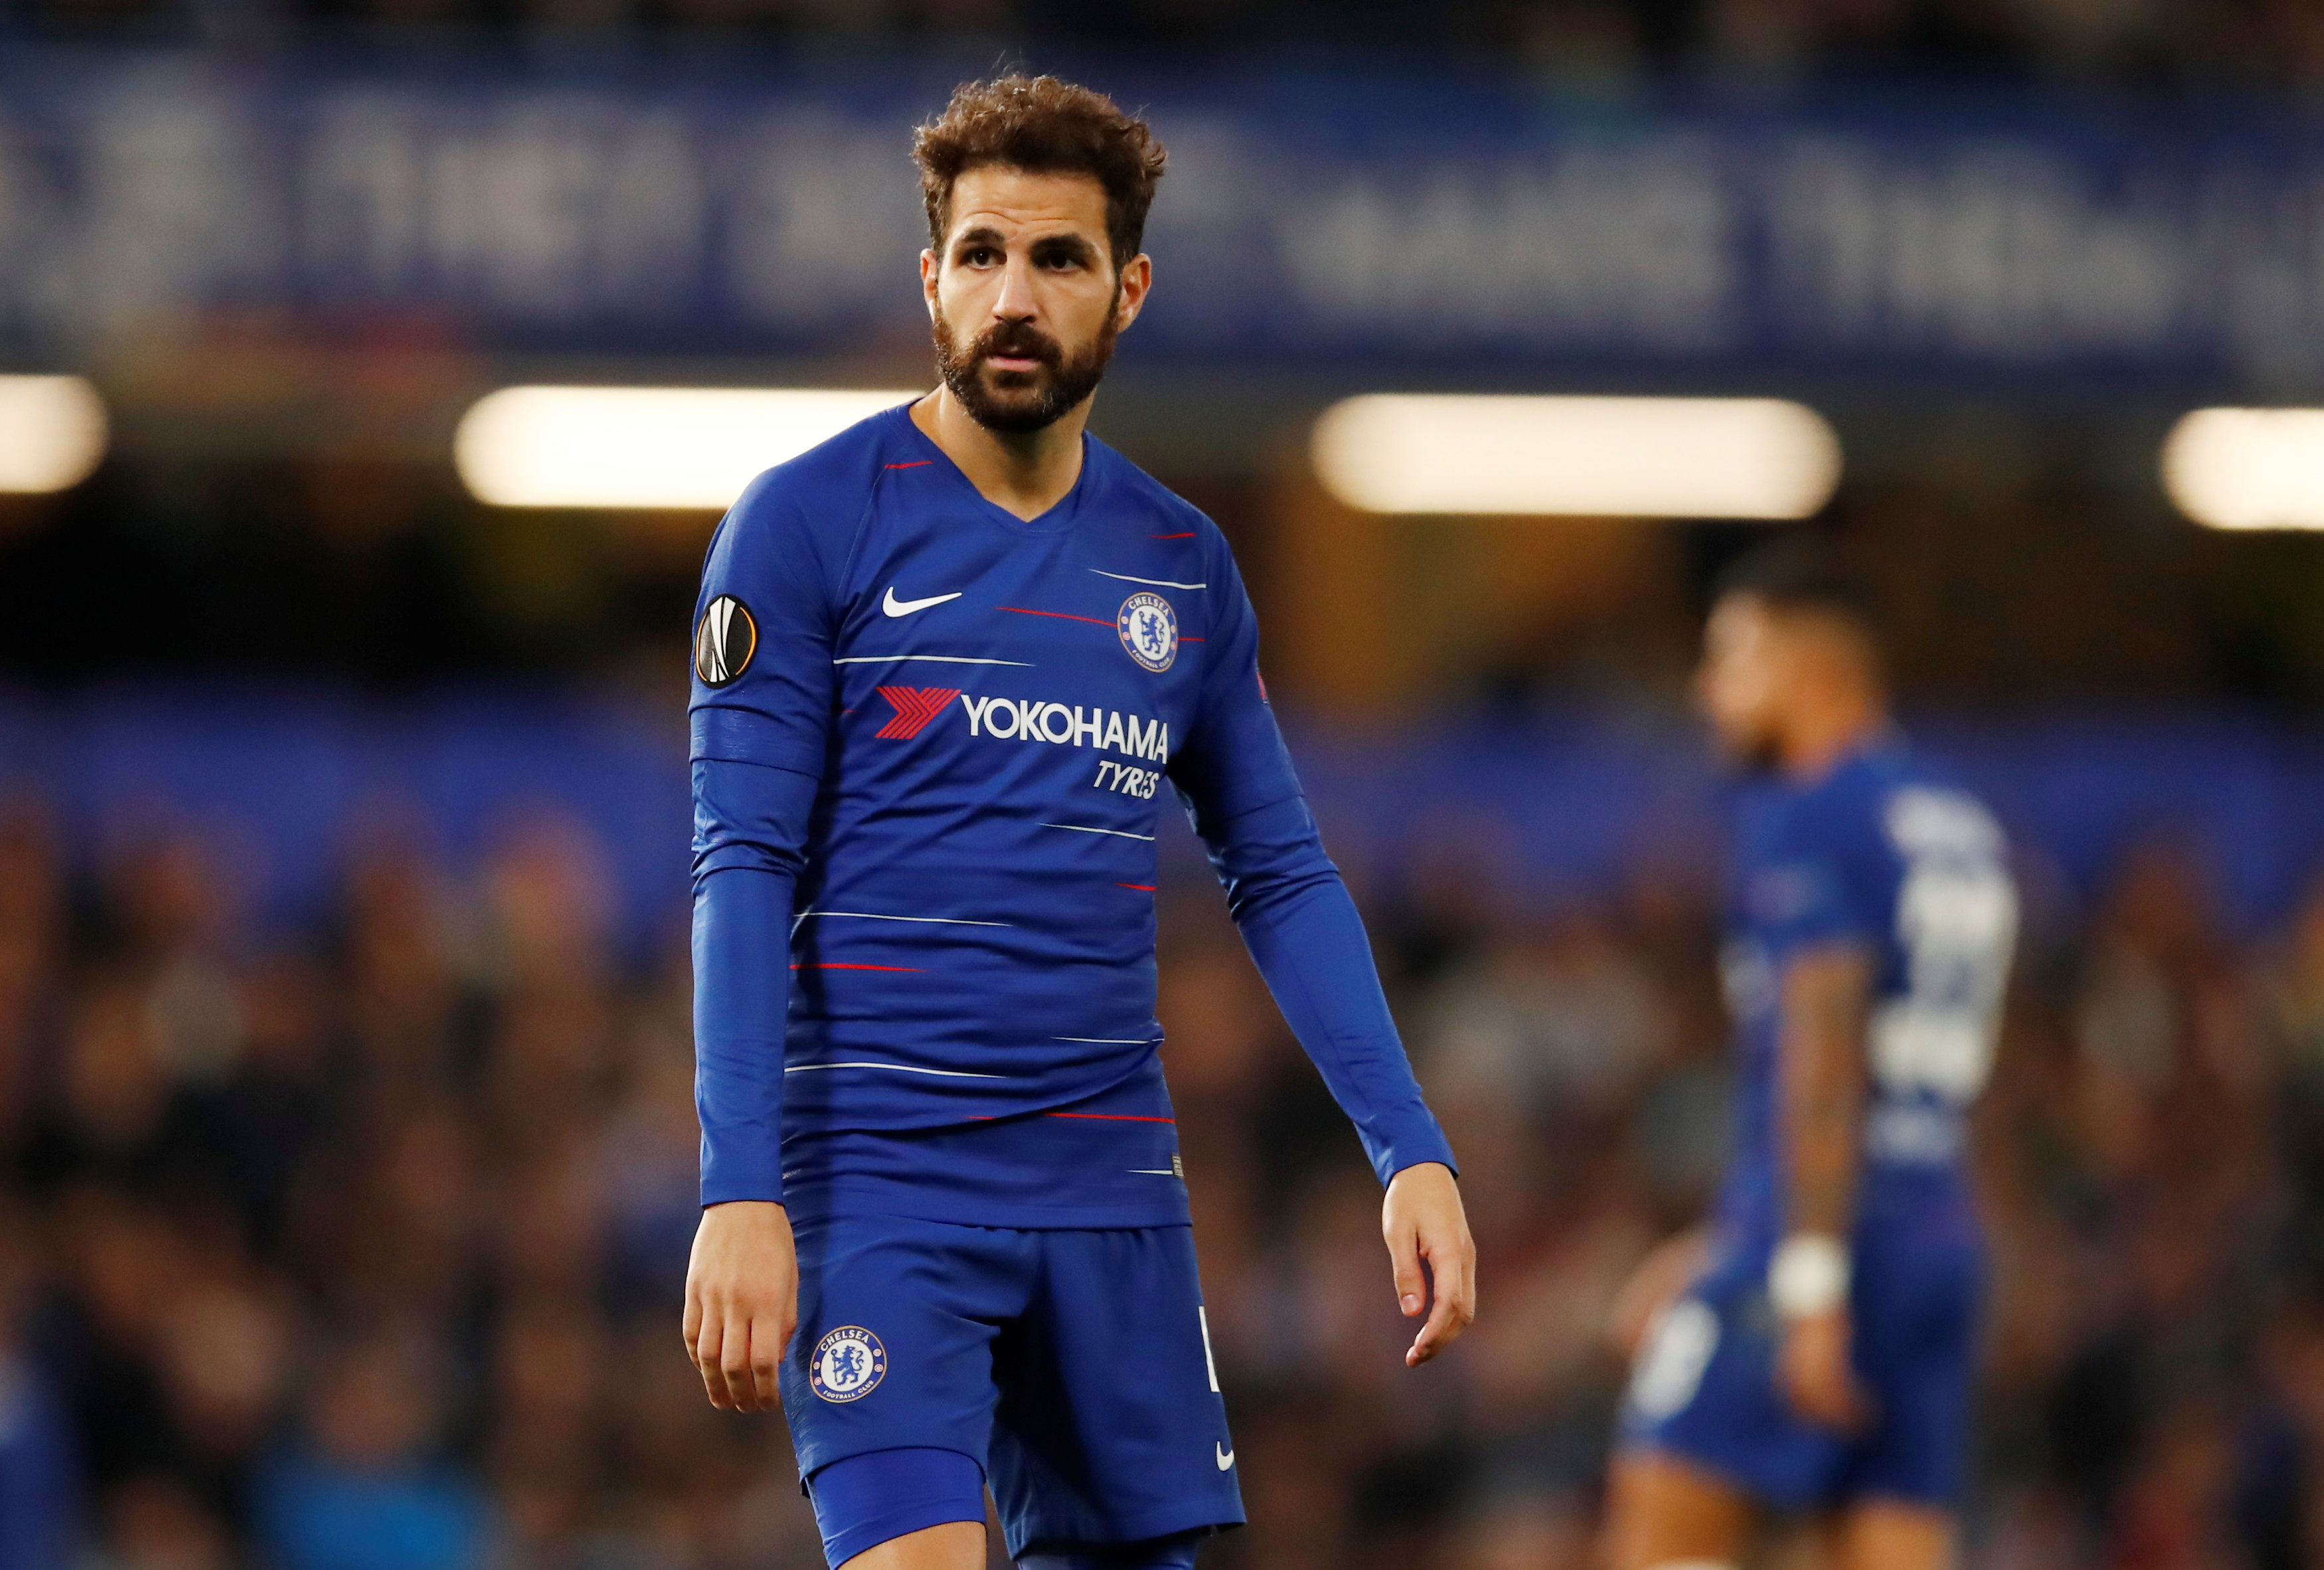 Cesc Fabregas wants to sign new contract at Chelsea